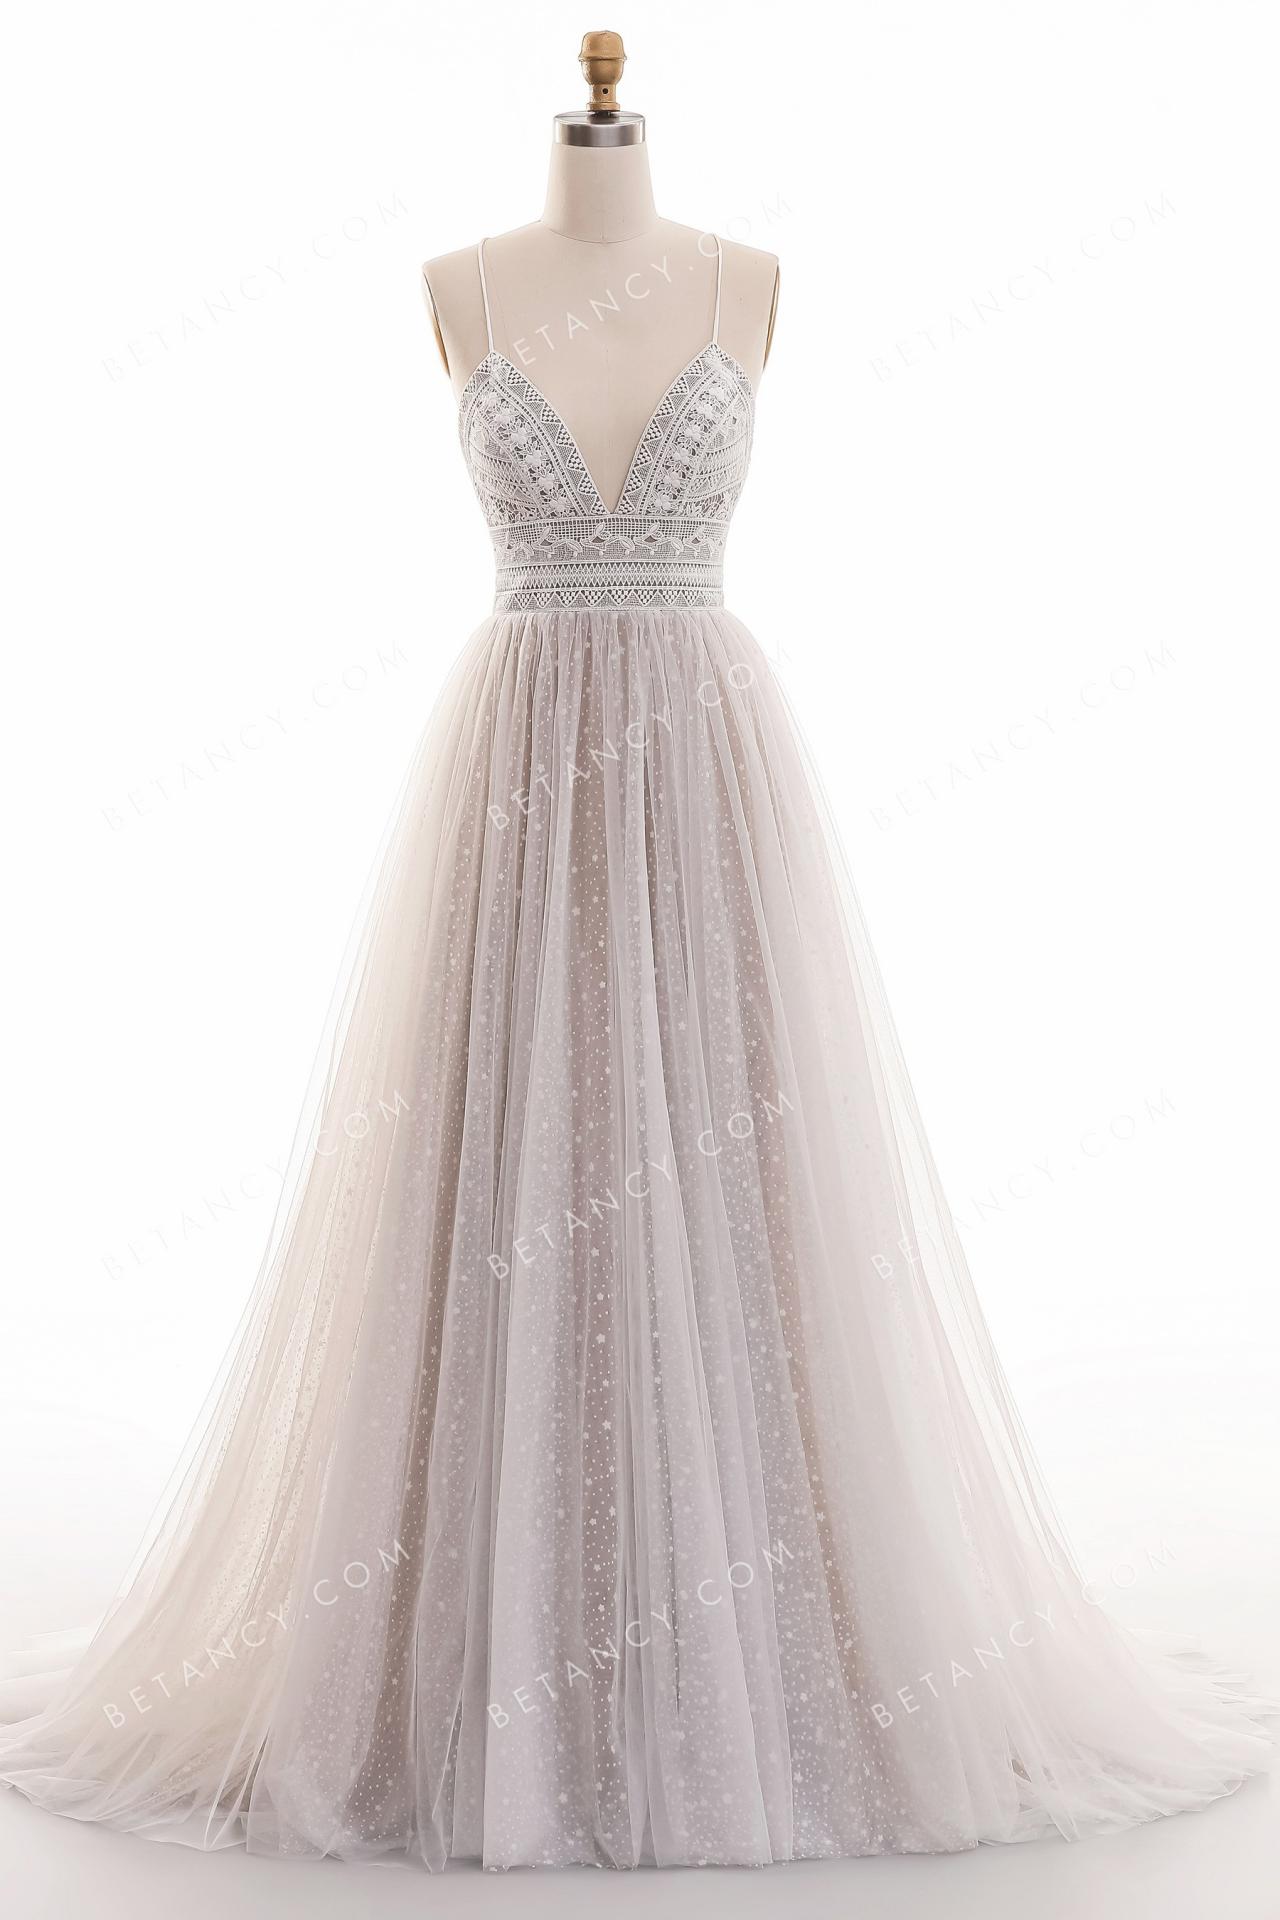 Romantic and dreamy star like lace and illusion tulle wedding dress 4